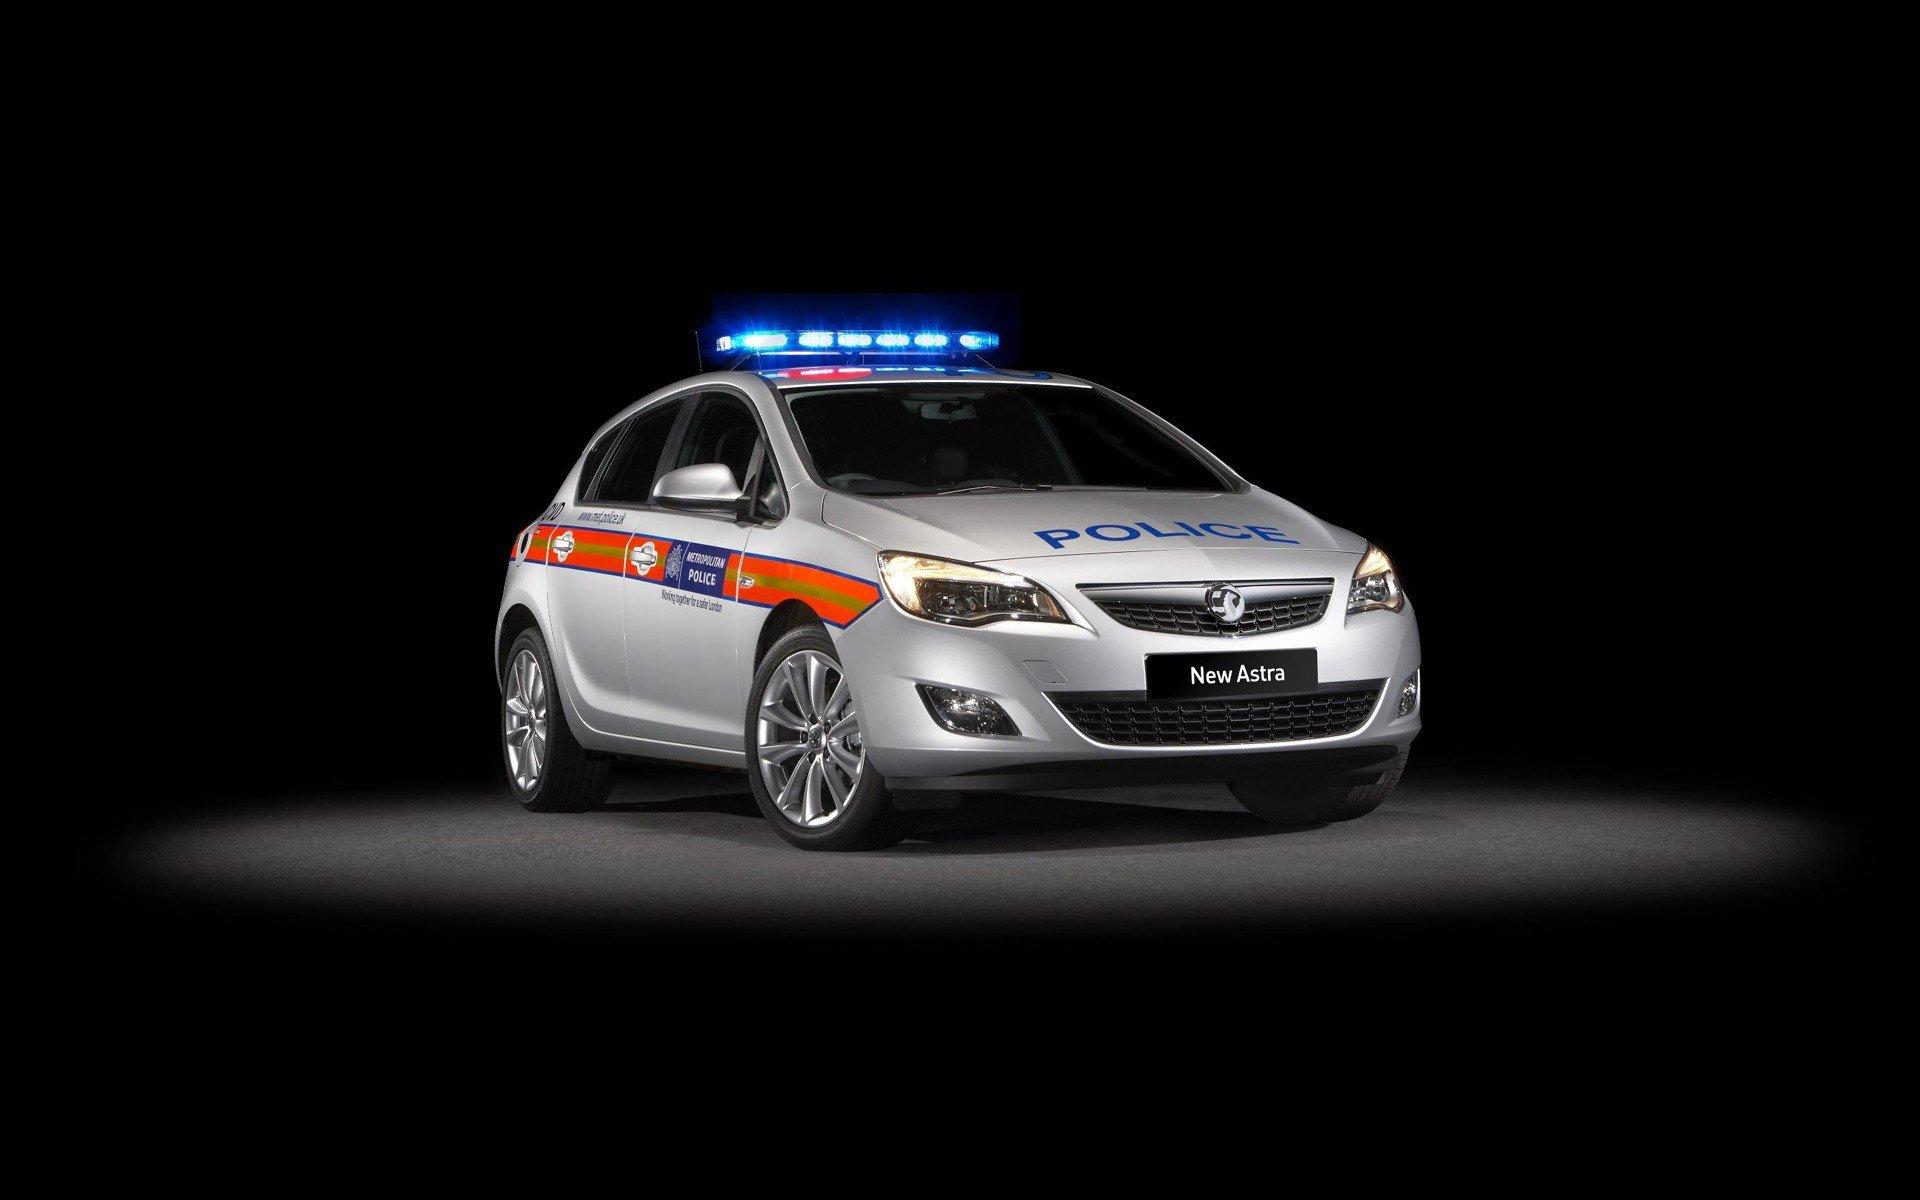 Vauxhall Astra Police Car Wallpapers